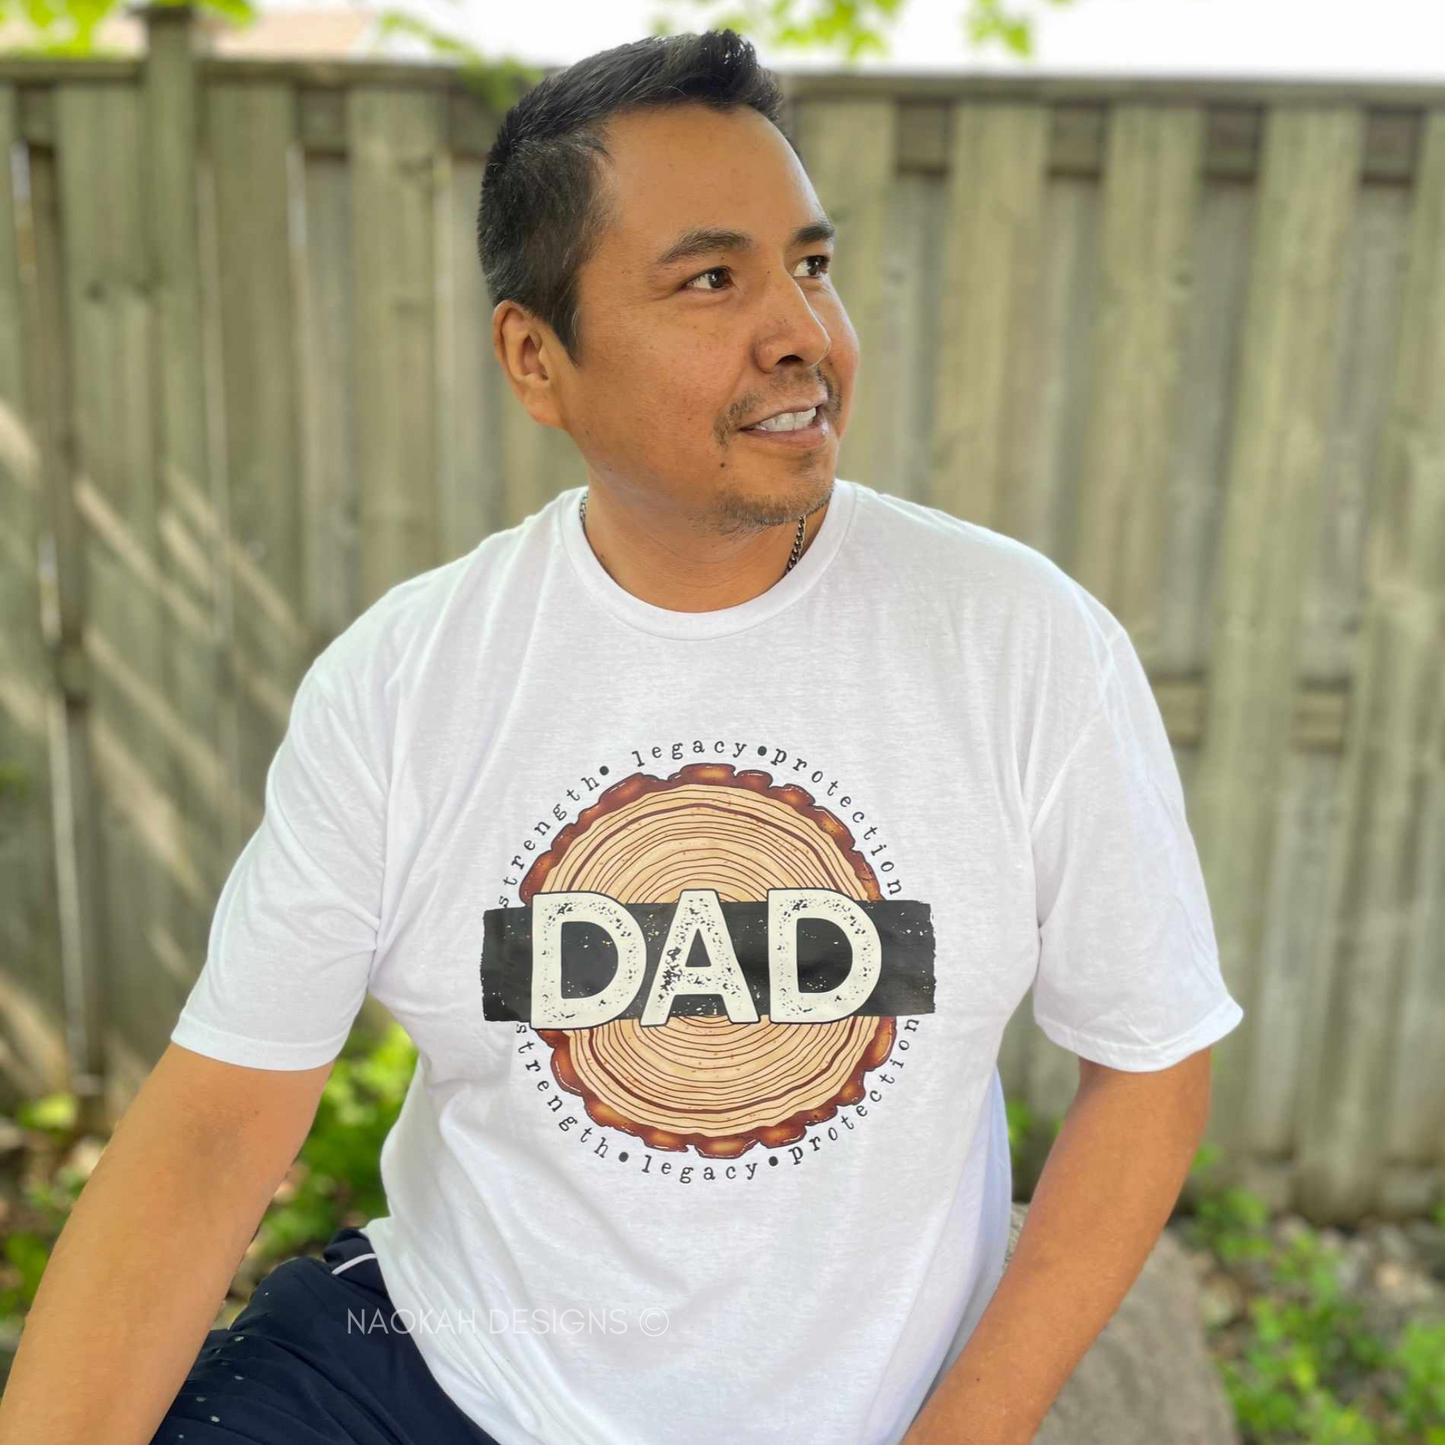 dad shirt, best dad ever shirt, fathers day gift shirt, fathers day gift, new dad shirt, father's day shirt, best dad t-shirt, best dad gift, dad shirt